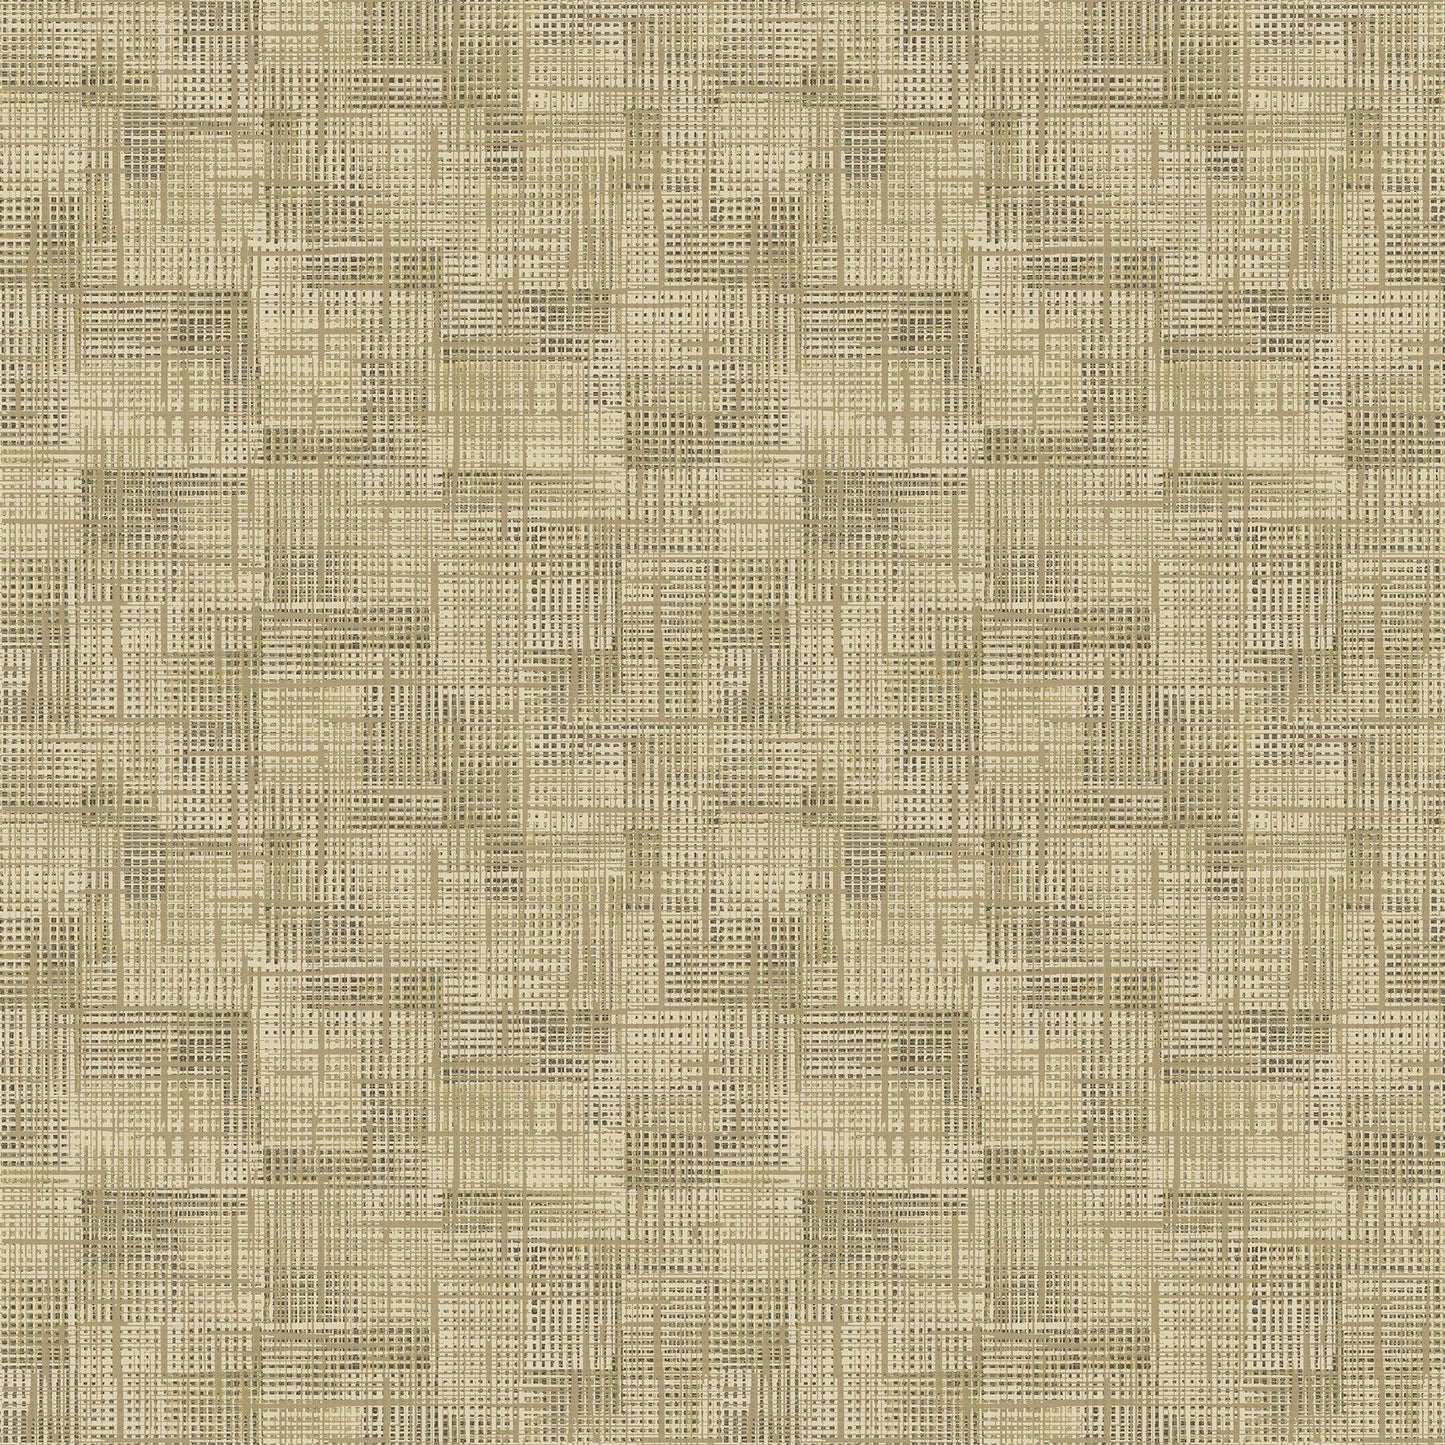 Looking for 2971-86160 Dimensions Ting Brown Abstract Woven Brown A-Street Prints Wallpaper